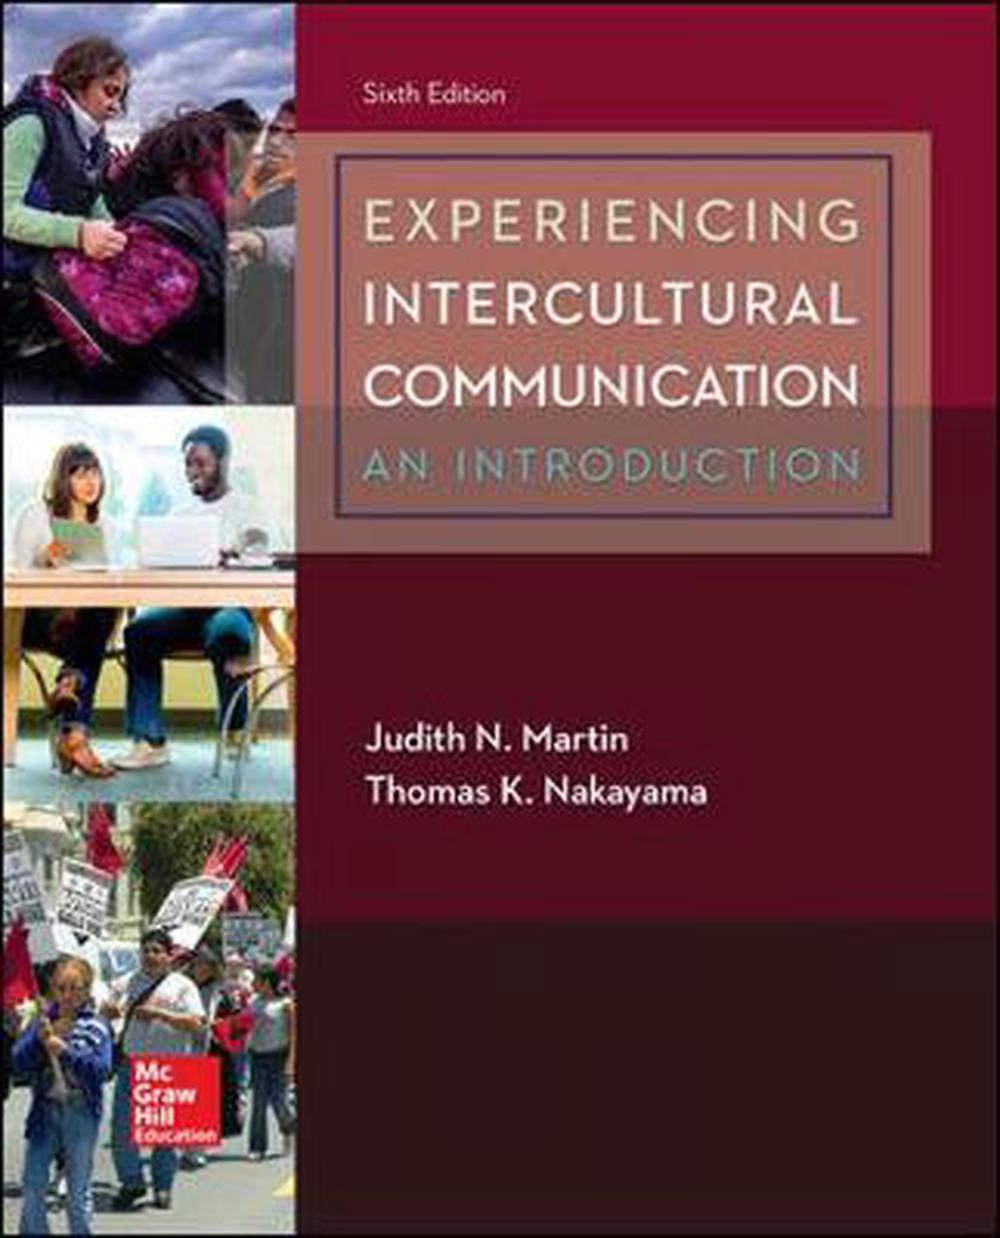 Experiencing Intercultural Communication An Introduction by Judith N